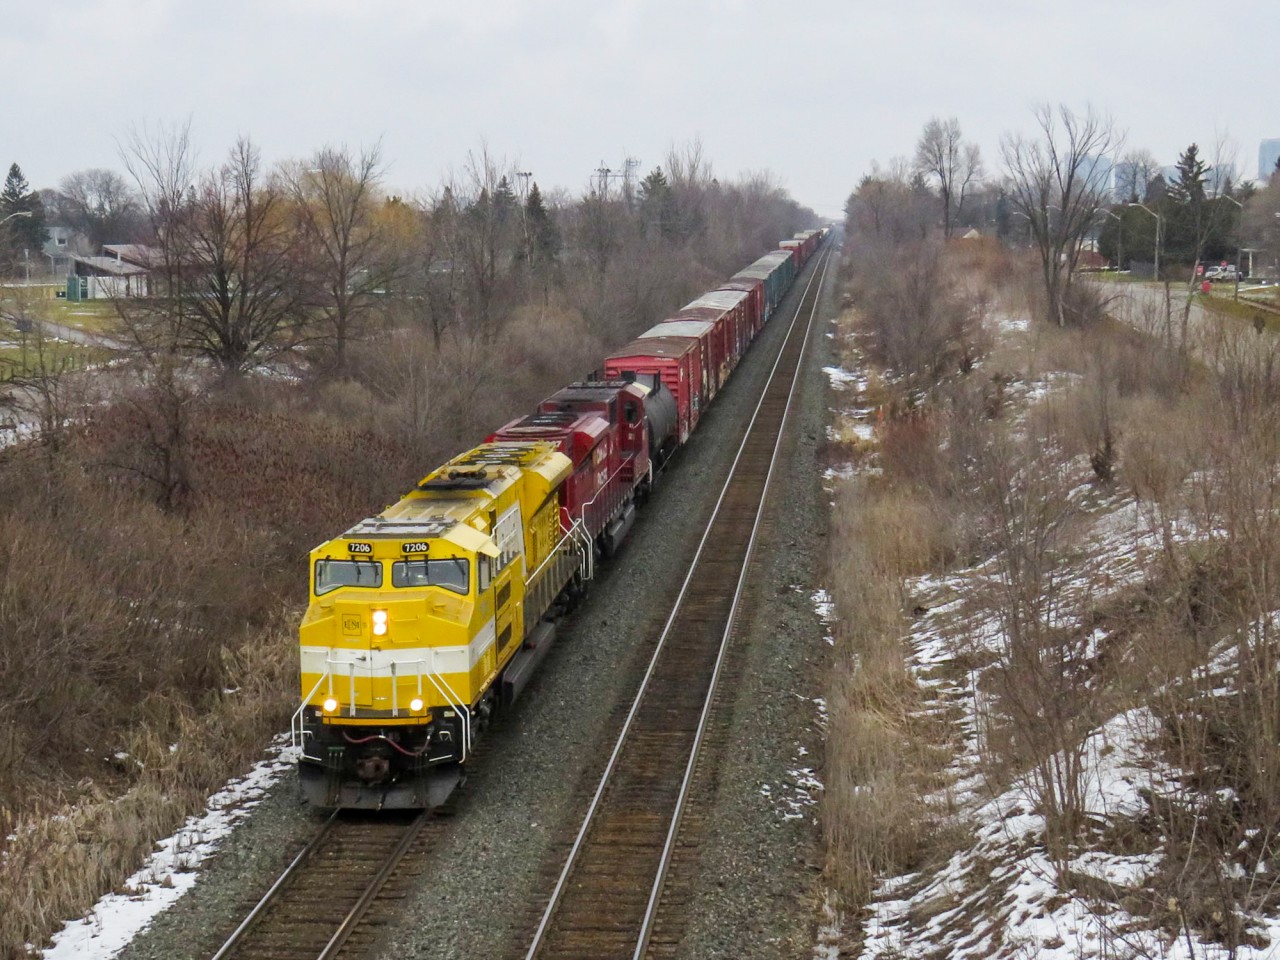 "EMDX Seven two naught six clear signal Kennedy." CP 421 crawls out of Toronto (Agincourt yard) with A full modern EMD consist of EMDX 7206 and CP 7027. After 3 weeks of watching them trail every train into and out of Toronto, it was nice to finally see these things lead. This was the 2nd day in a row (and the 2nd day ever) that an EMDX SD70ACE-T4 led a train out of Toronto. Even though I have made my opinion of these units very clear, I hope that they continue to lead so that those who actually wish to catch these units leading can.